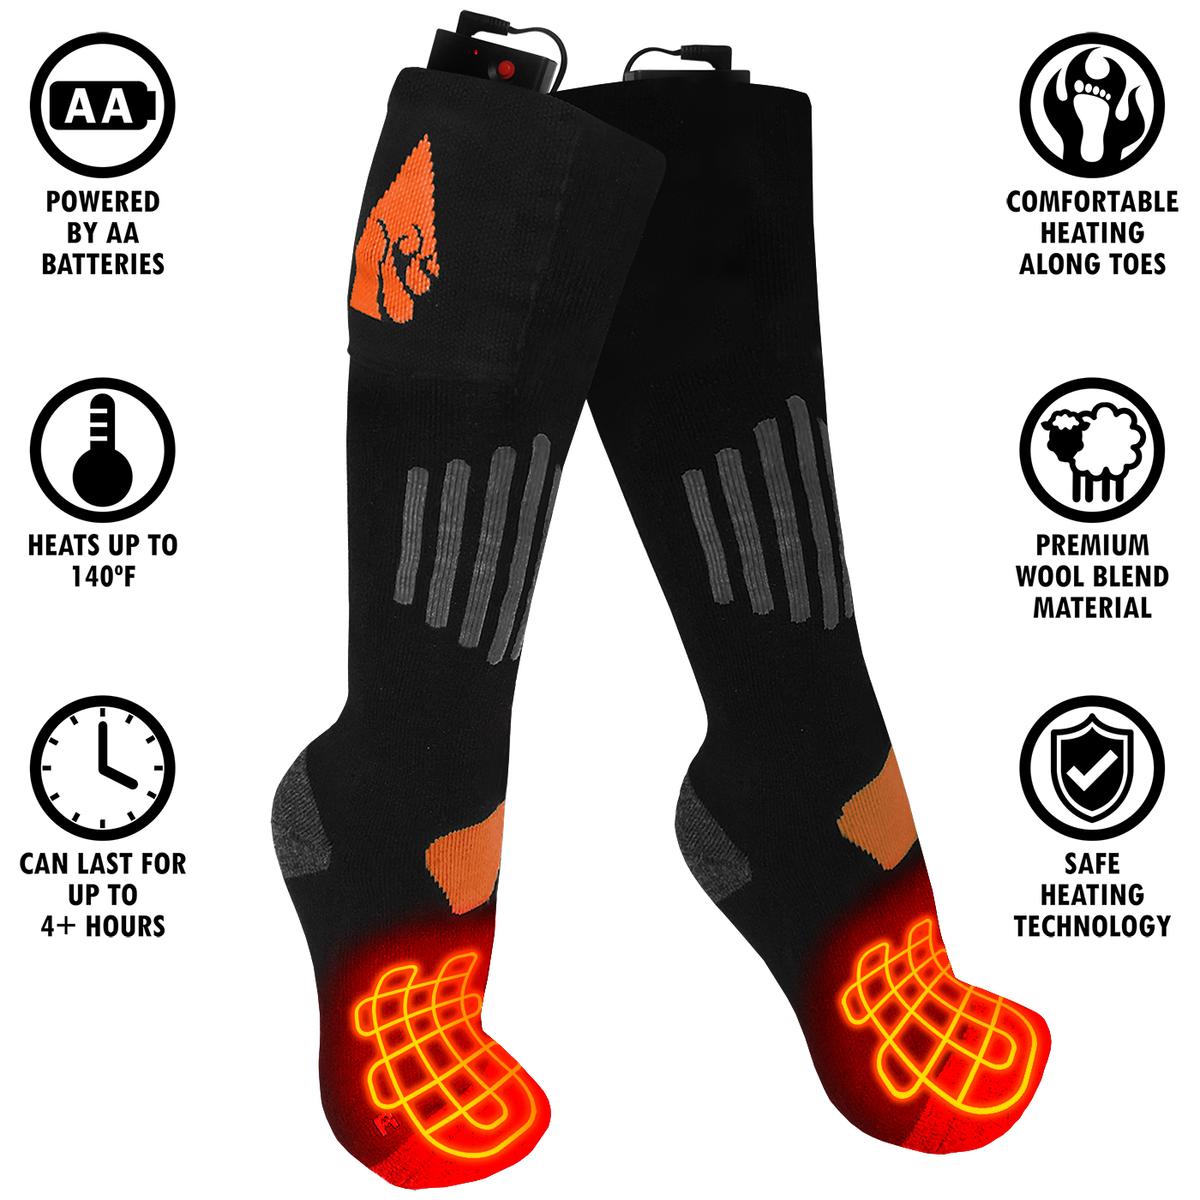 ActionHeat AA Wool Battery Heated Socks - Replacement Socks Only - Back